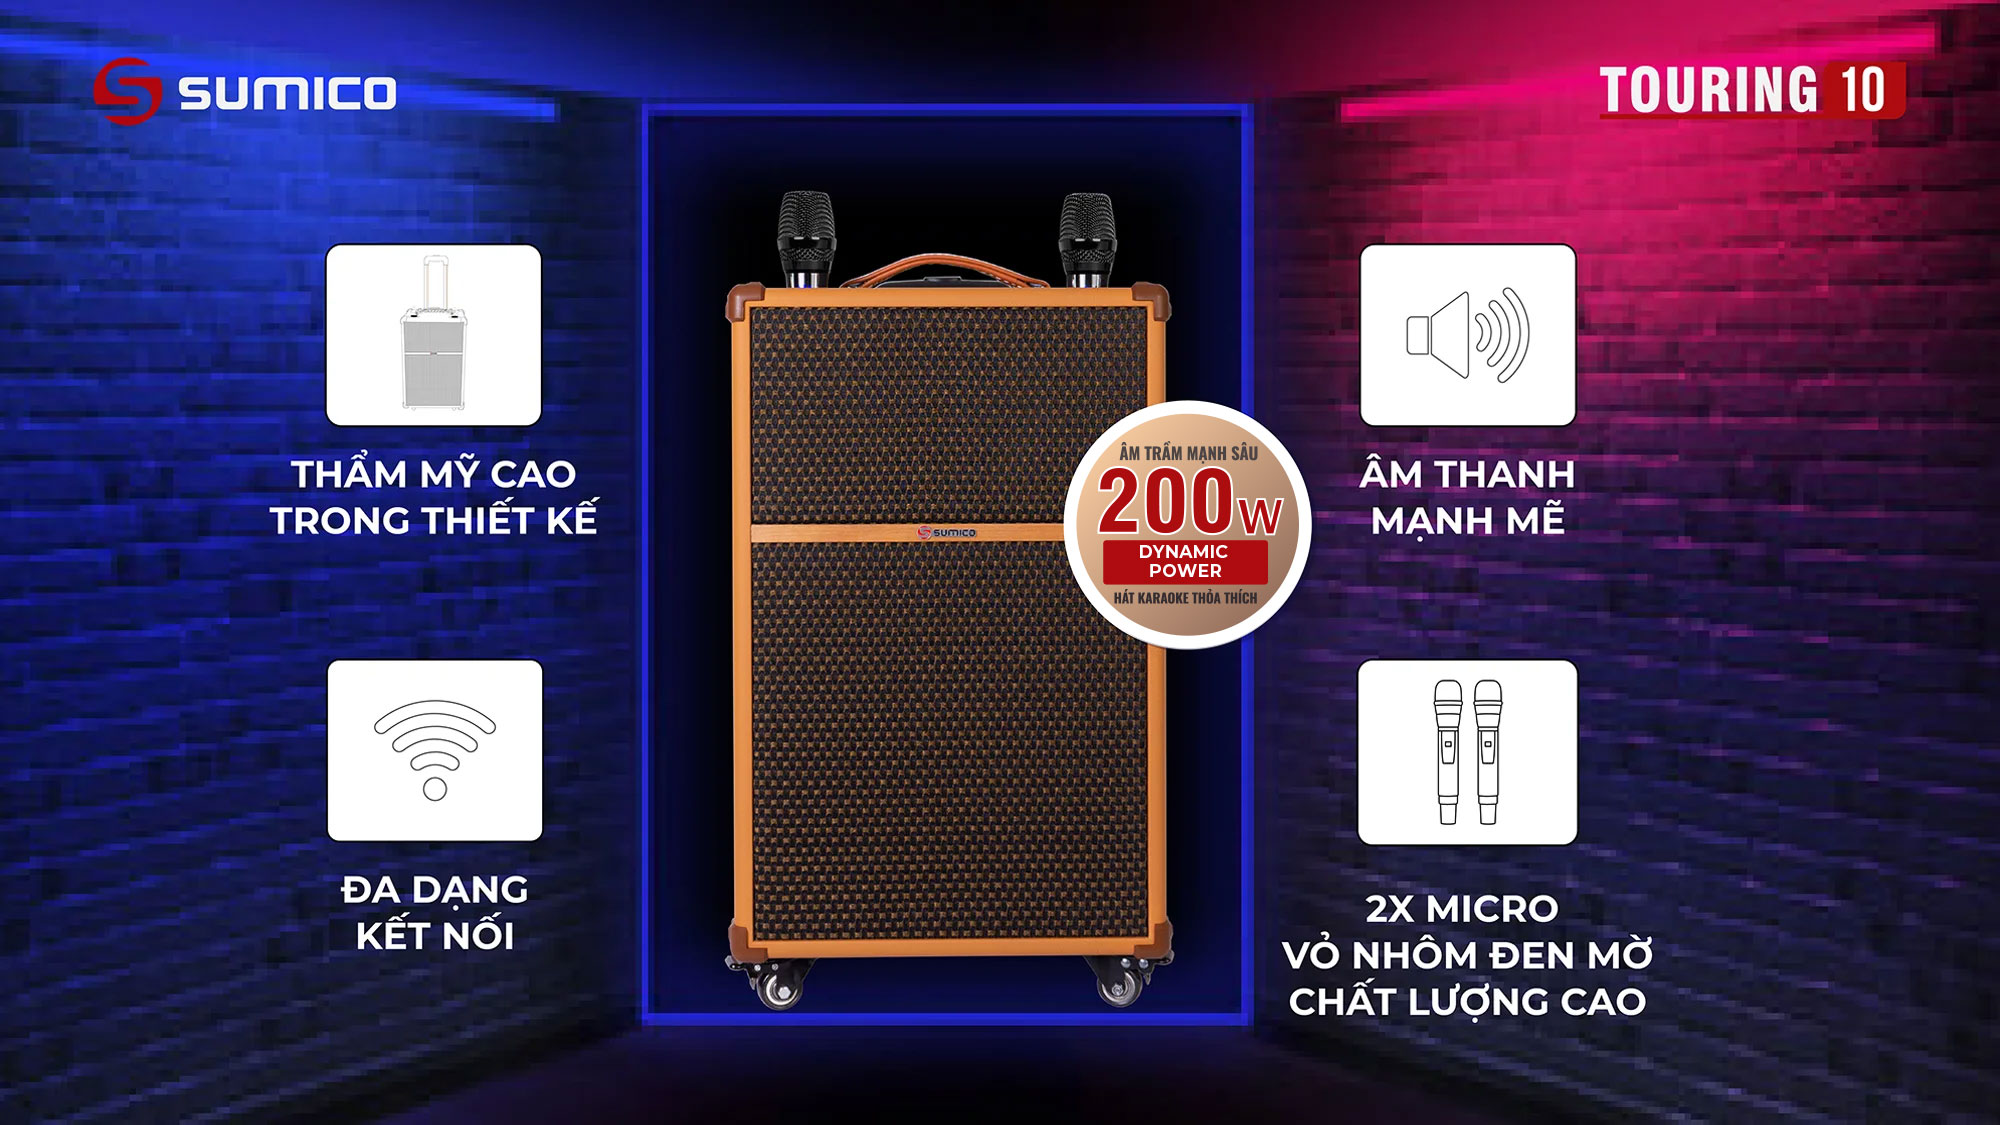 Loa di động Sumico Touring 10 | Anh Duy Audio